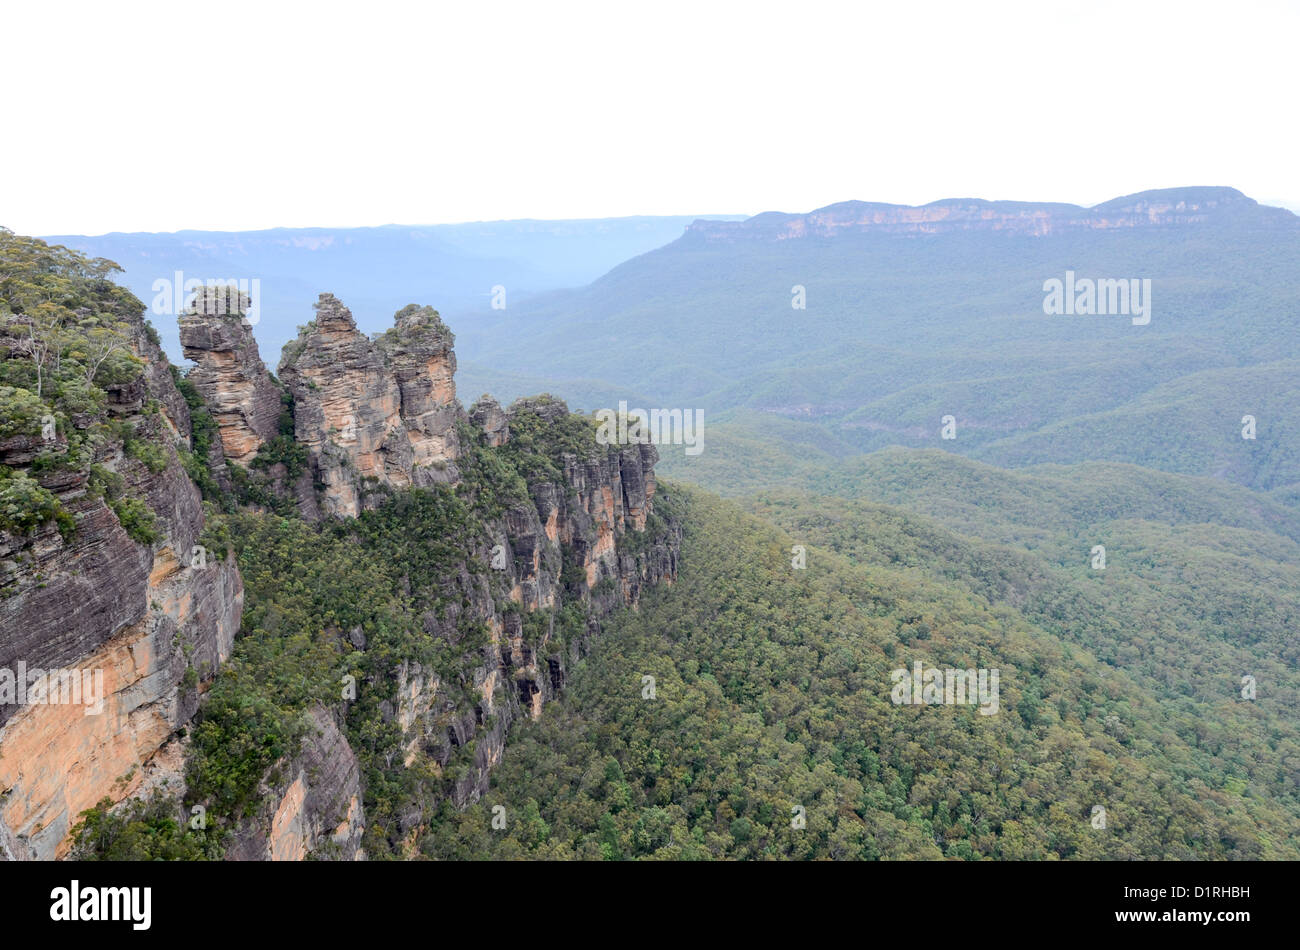 KATOOMBA, Australia - A wide-angle shot of the Three Sisters in the Blue Mountains as seen from Echo Point in Katoomba, New South Wales, Australia. Stock Photo